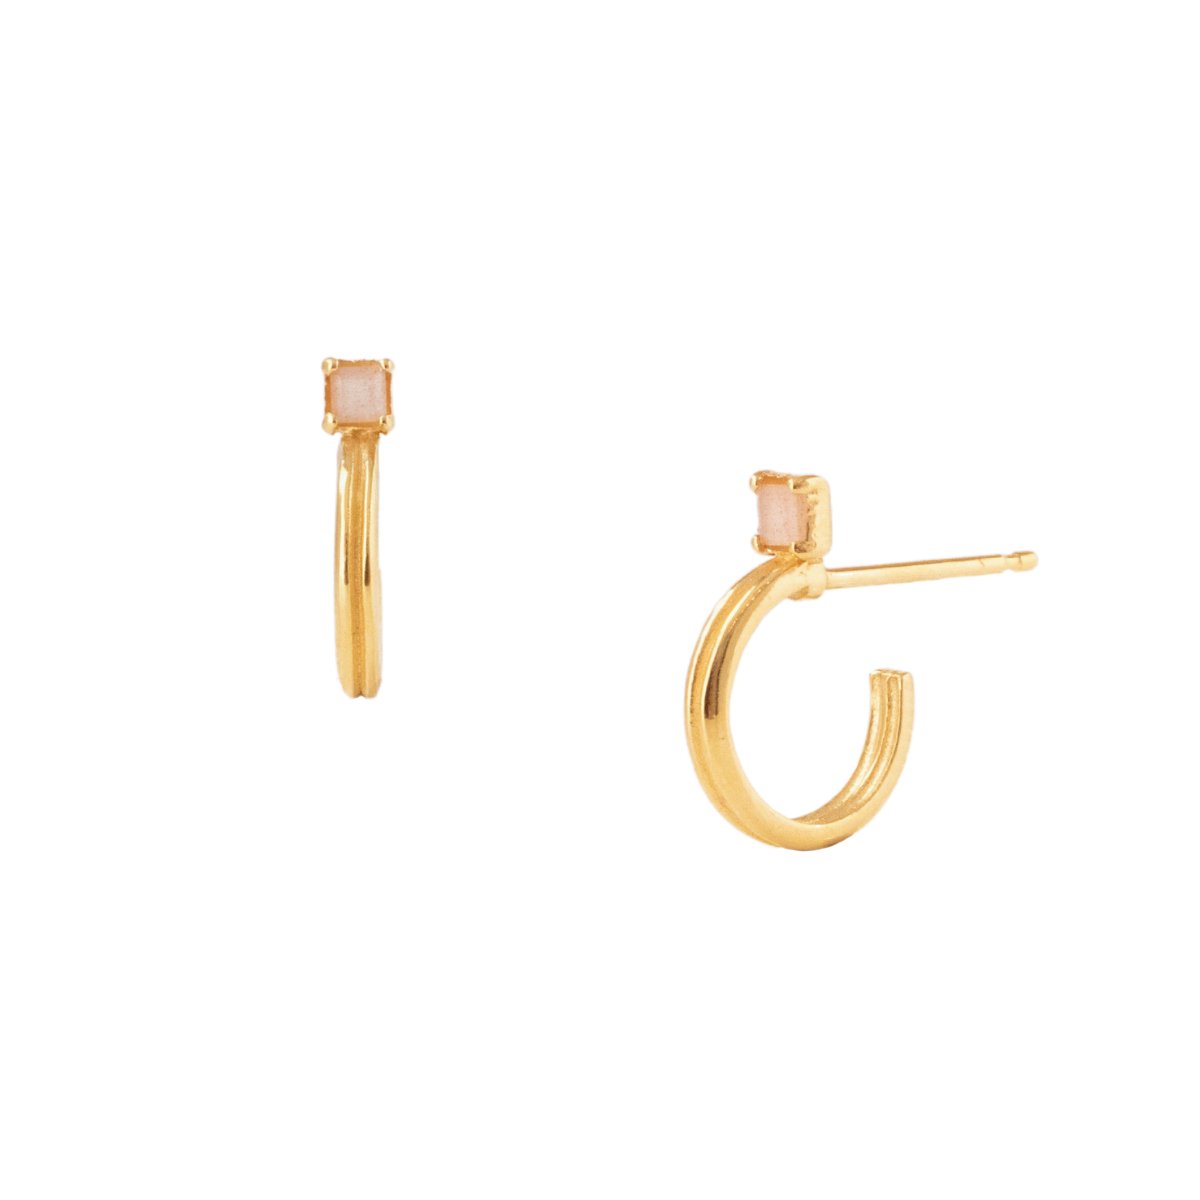 RADIANT ARC HUGGIE HOOPS - PEACH MOONSTONE &amp; GOLD - SO PRETTY CARA COTTER